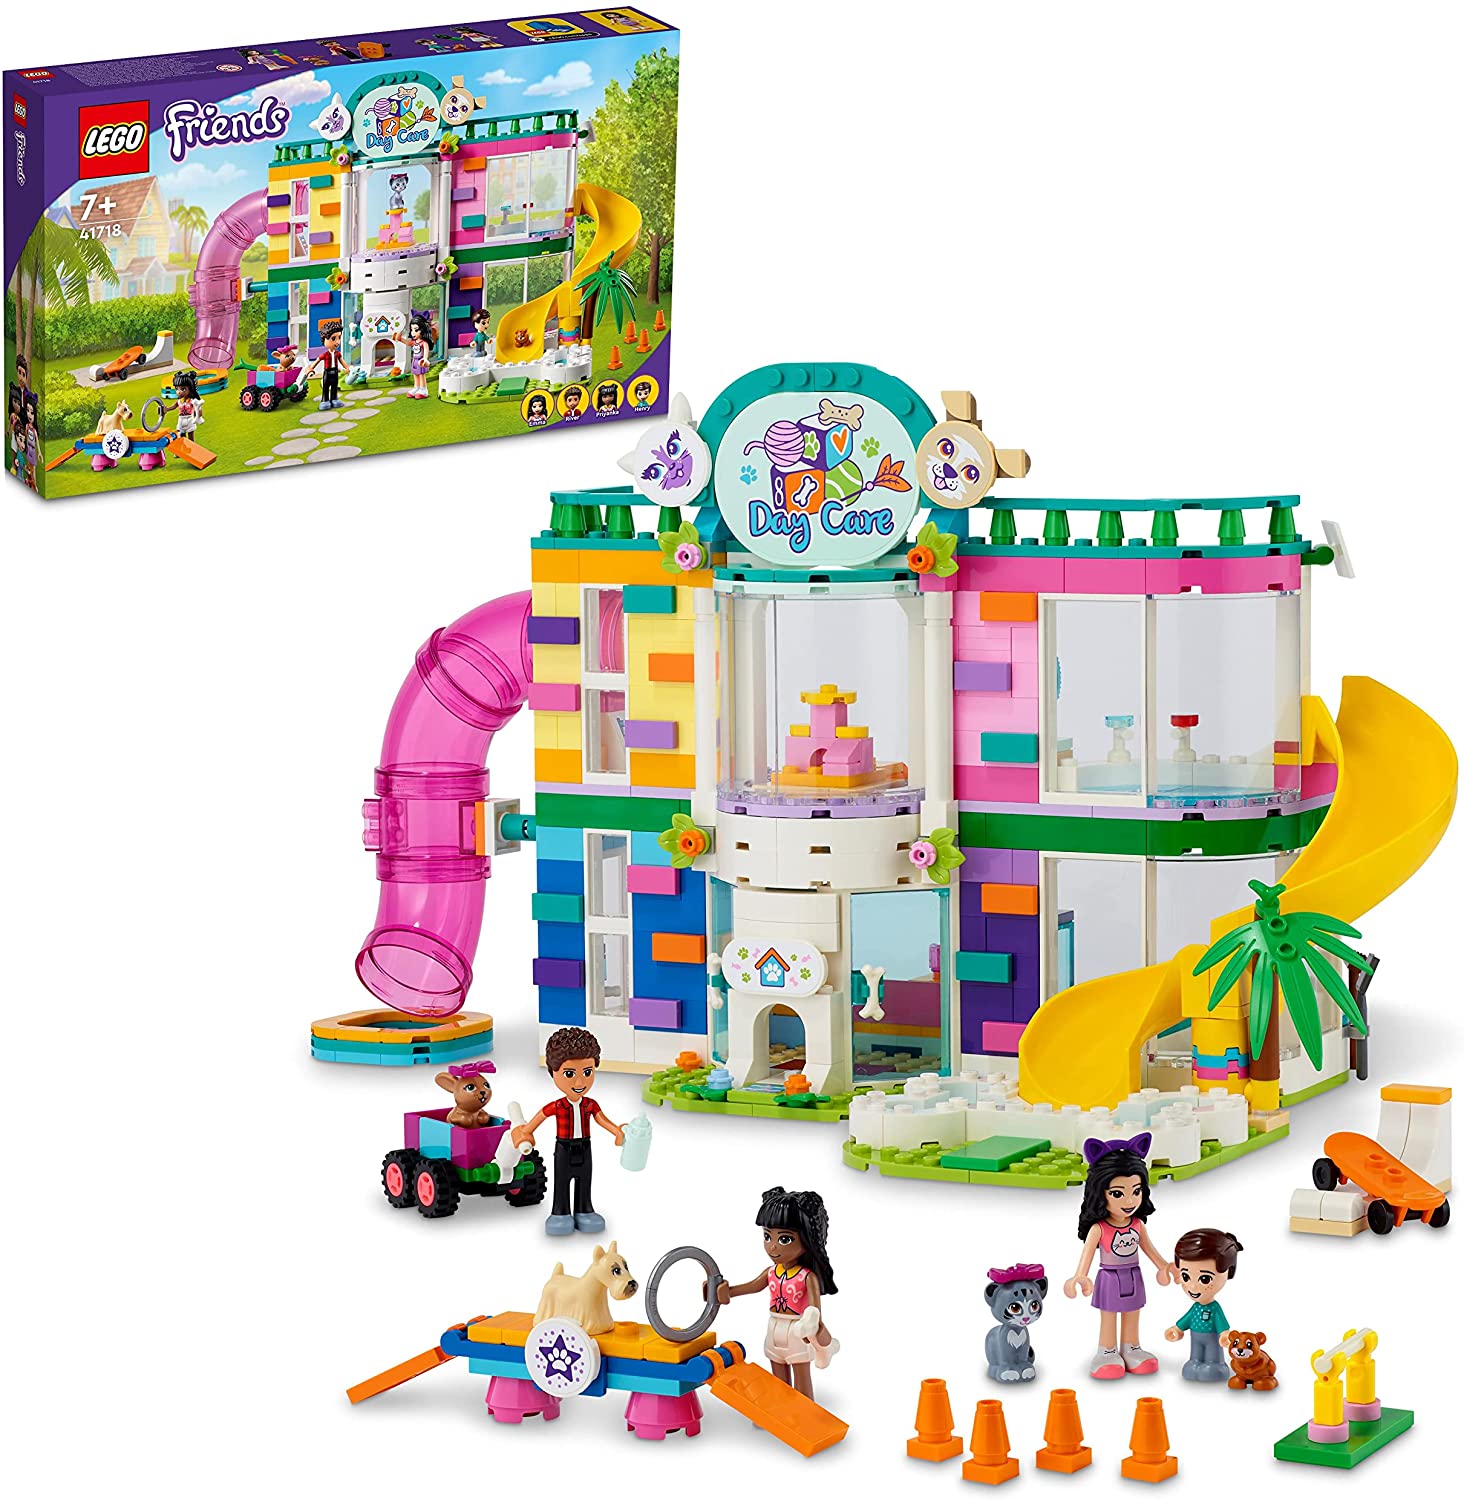 LEGO 41718 Friends Animal Daycare, Heartlake City Playset with Animal Figur